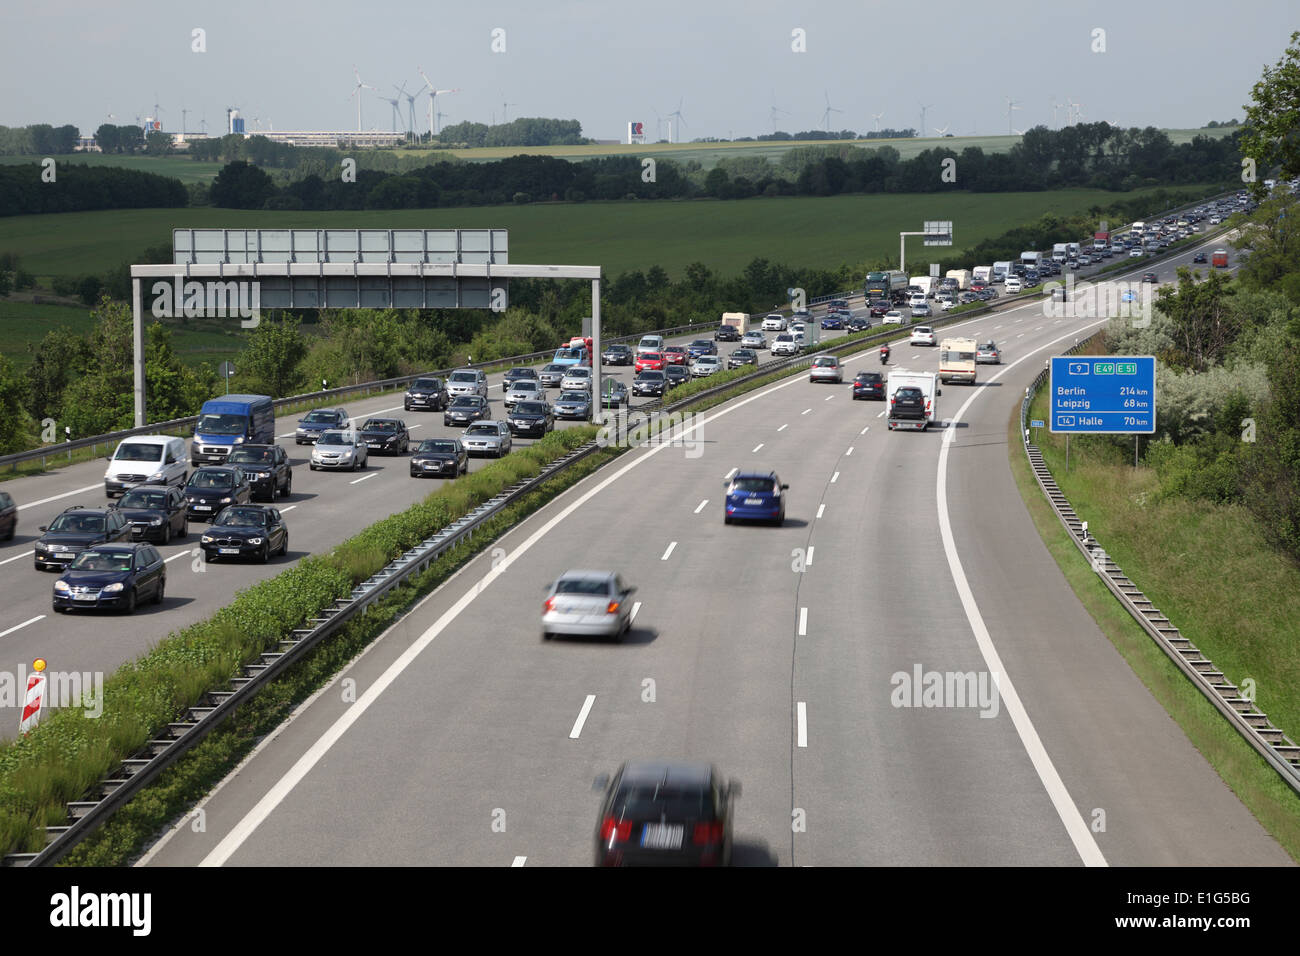 Traffic Jam because of a construction site on the autobahn (highway) in Germany Stock Photo